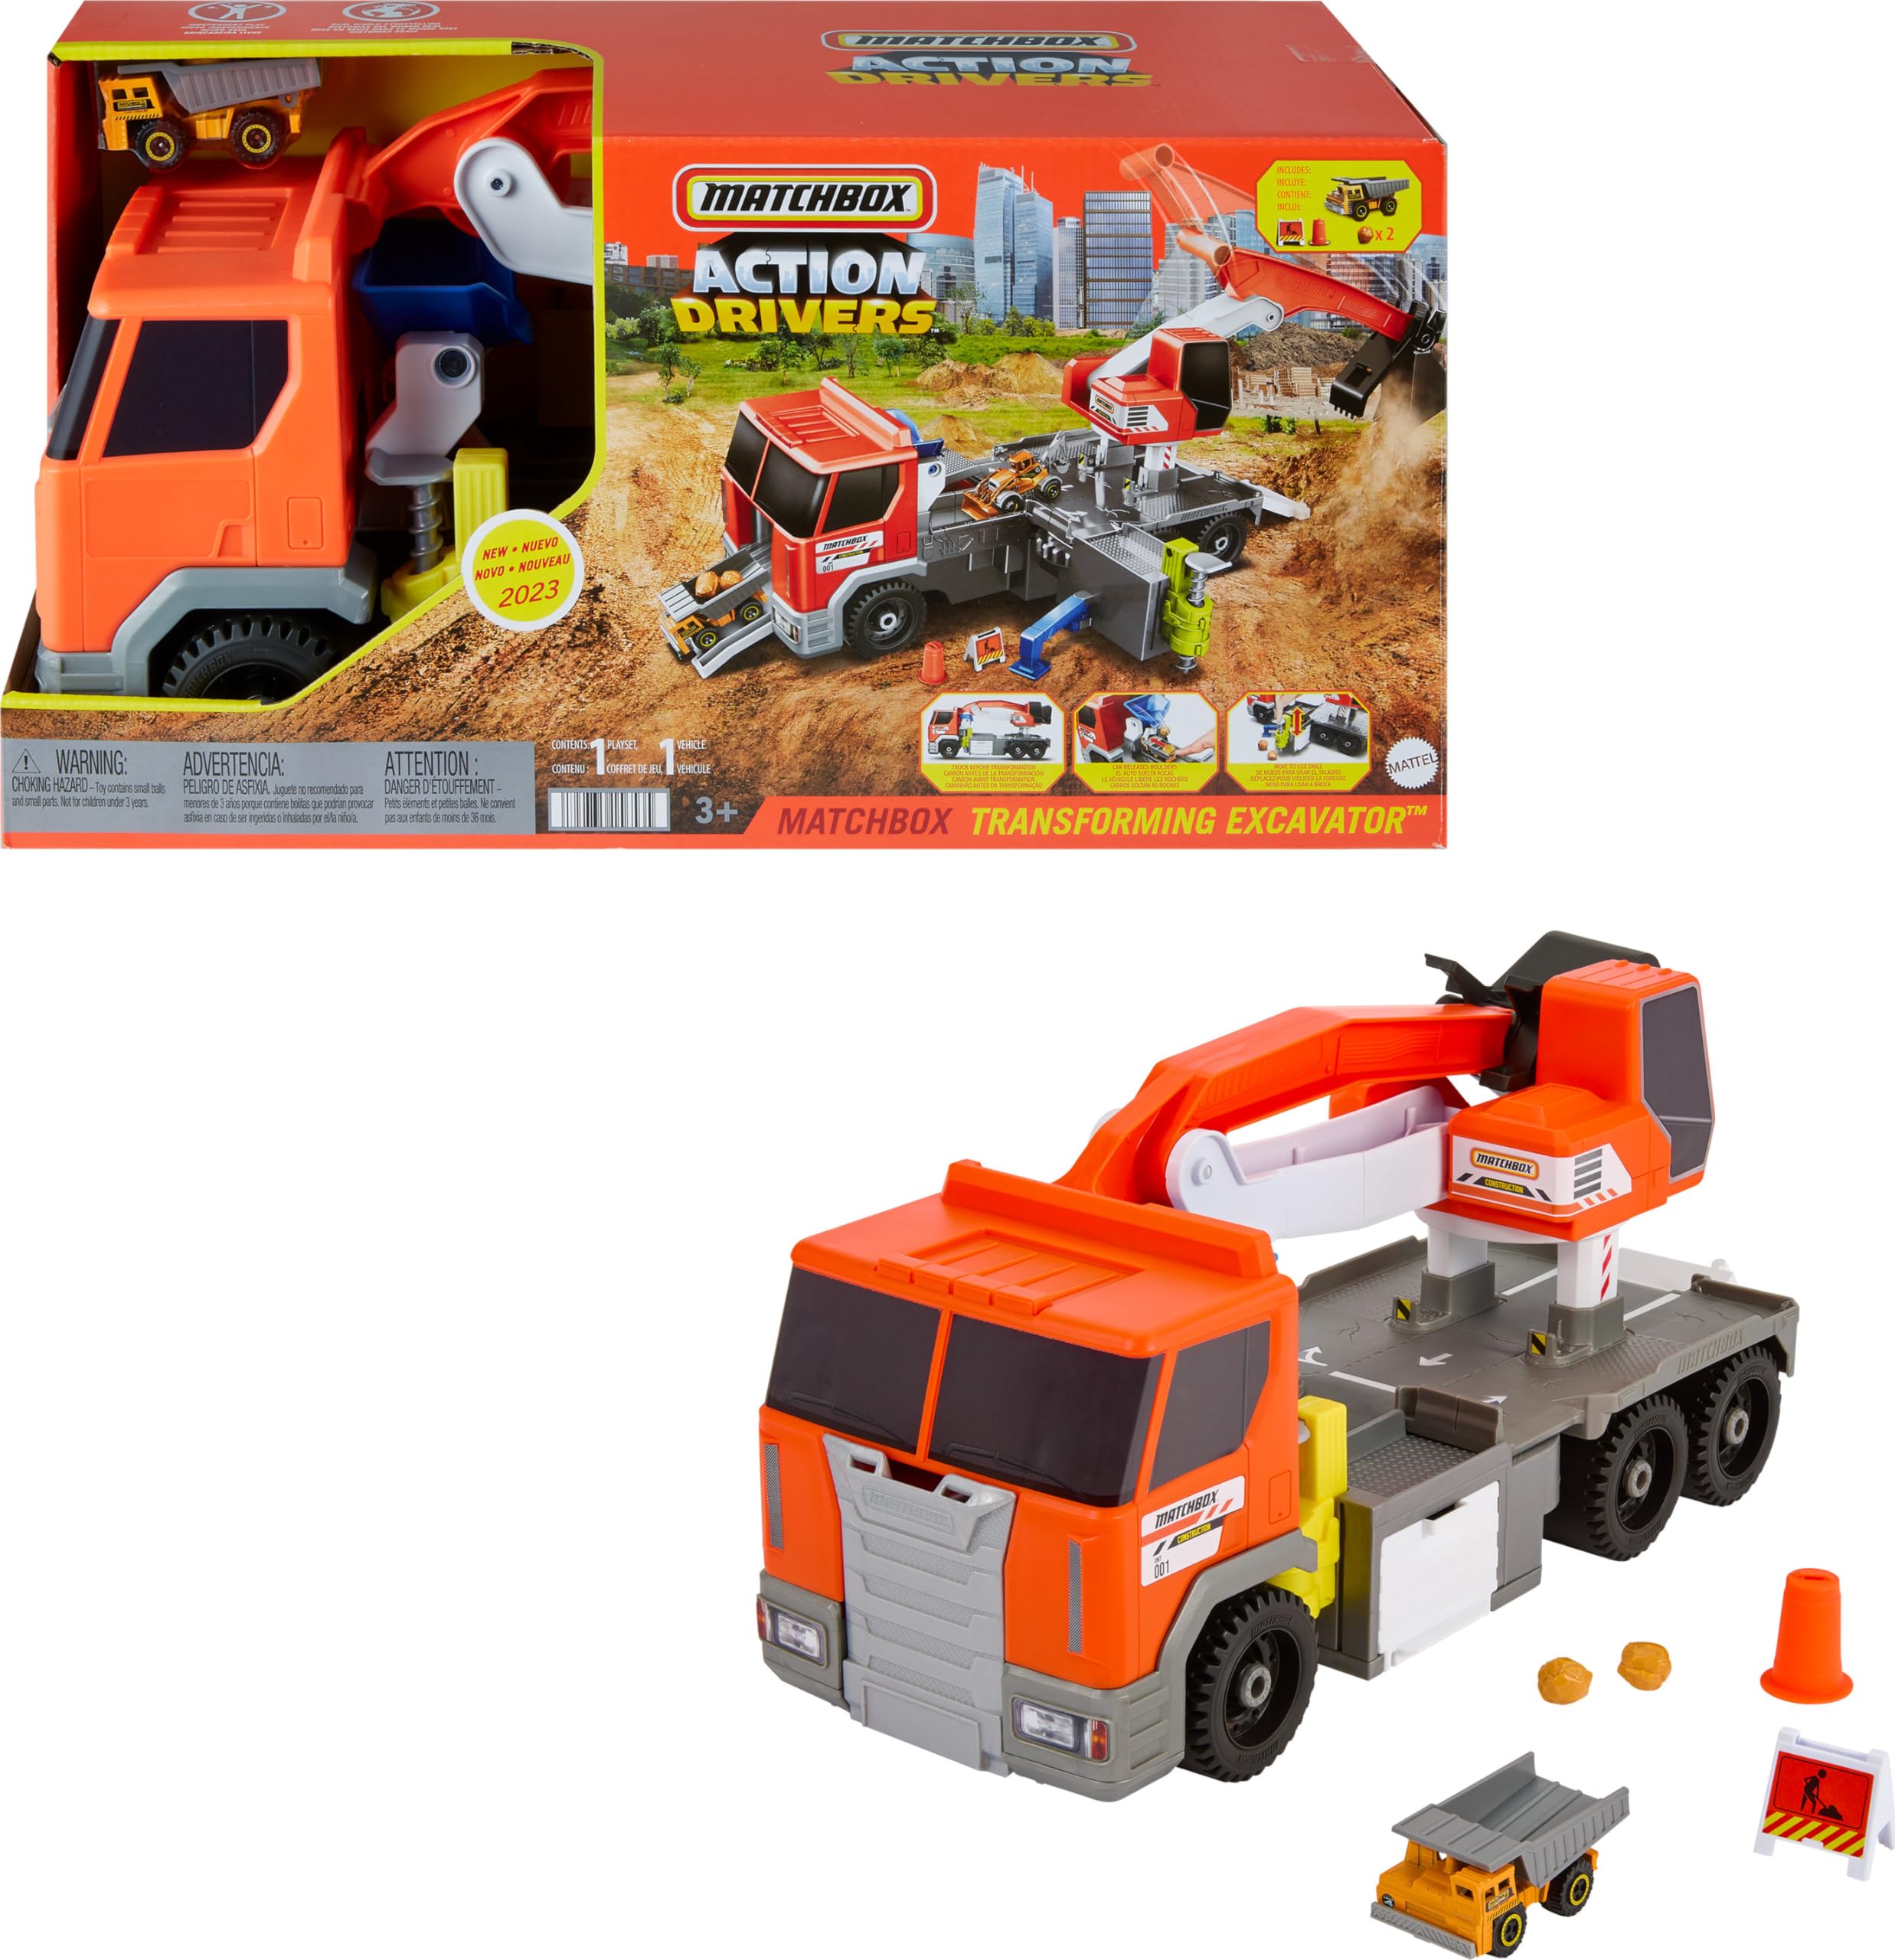 Matchbox Action Drivers Transforming Excavator 1:64 Scale Truck & Playset w/ 4 Themed Accessories $14.27 + Free Shipping w/ Prime or on $35+